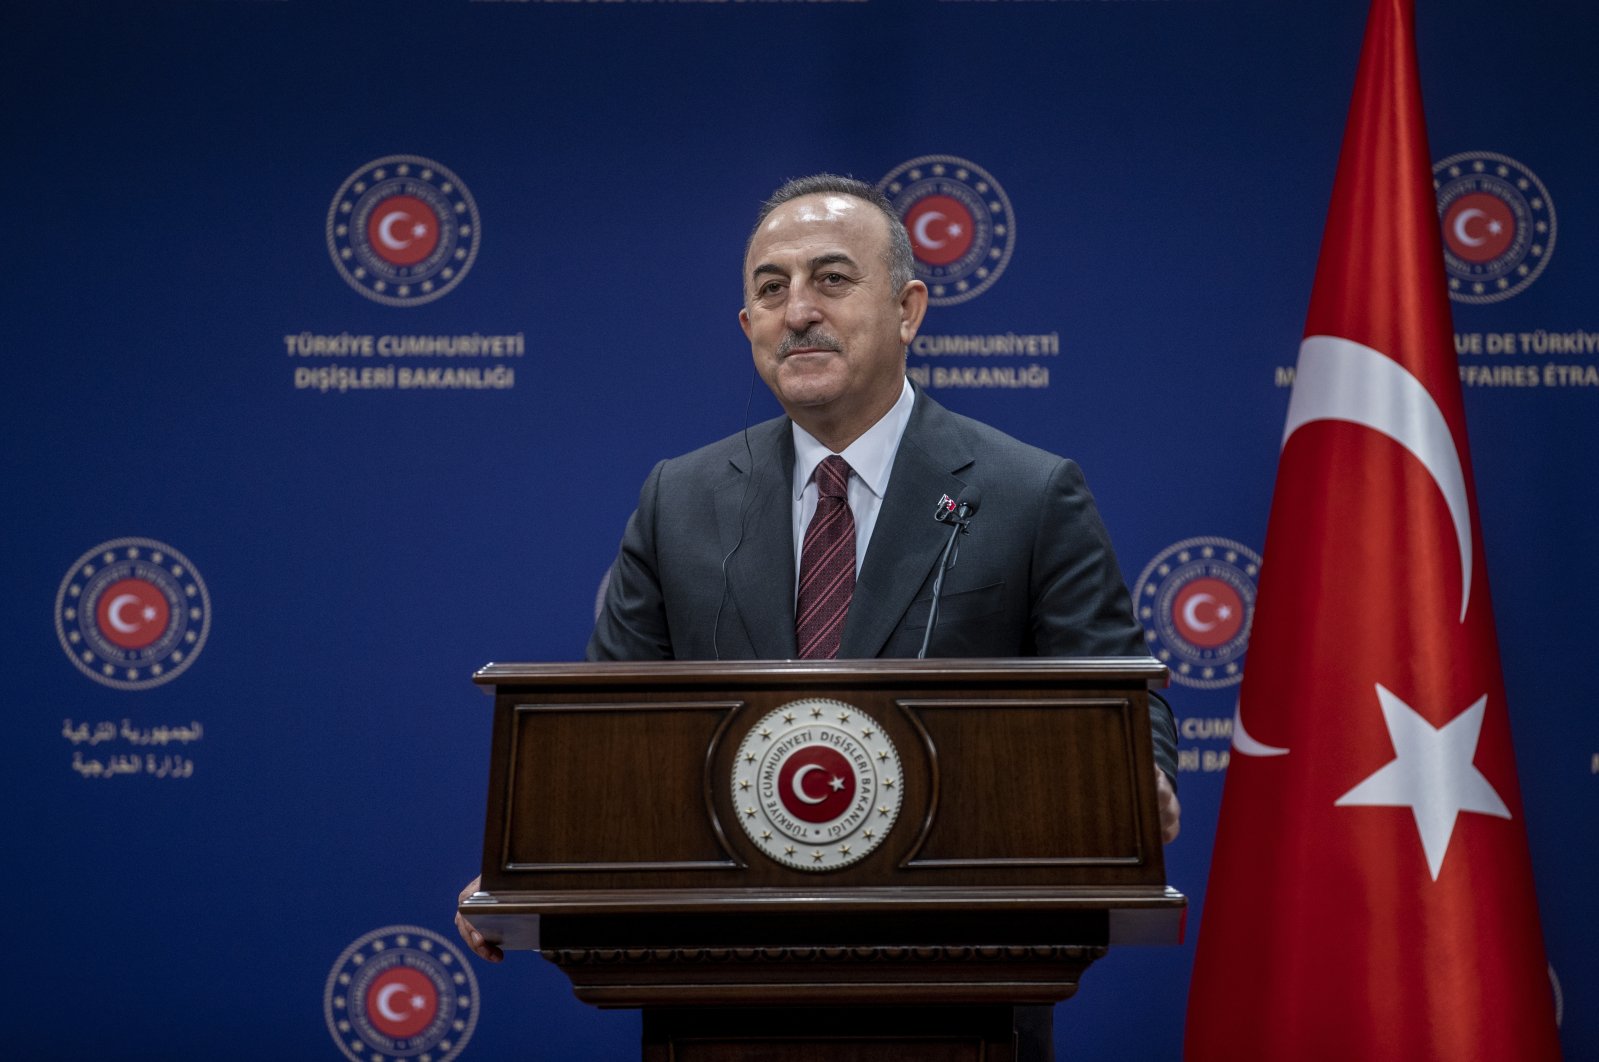 Foreign Minister Mevlüt Çavuşoğlu speaks at a joint news conference with his counterpart from Ivory Coast Kandia Camara in Ankara, Turkey, March 15, 2022. (AA Photo)